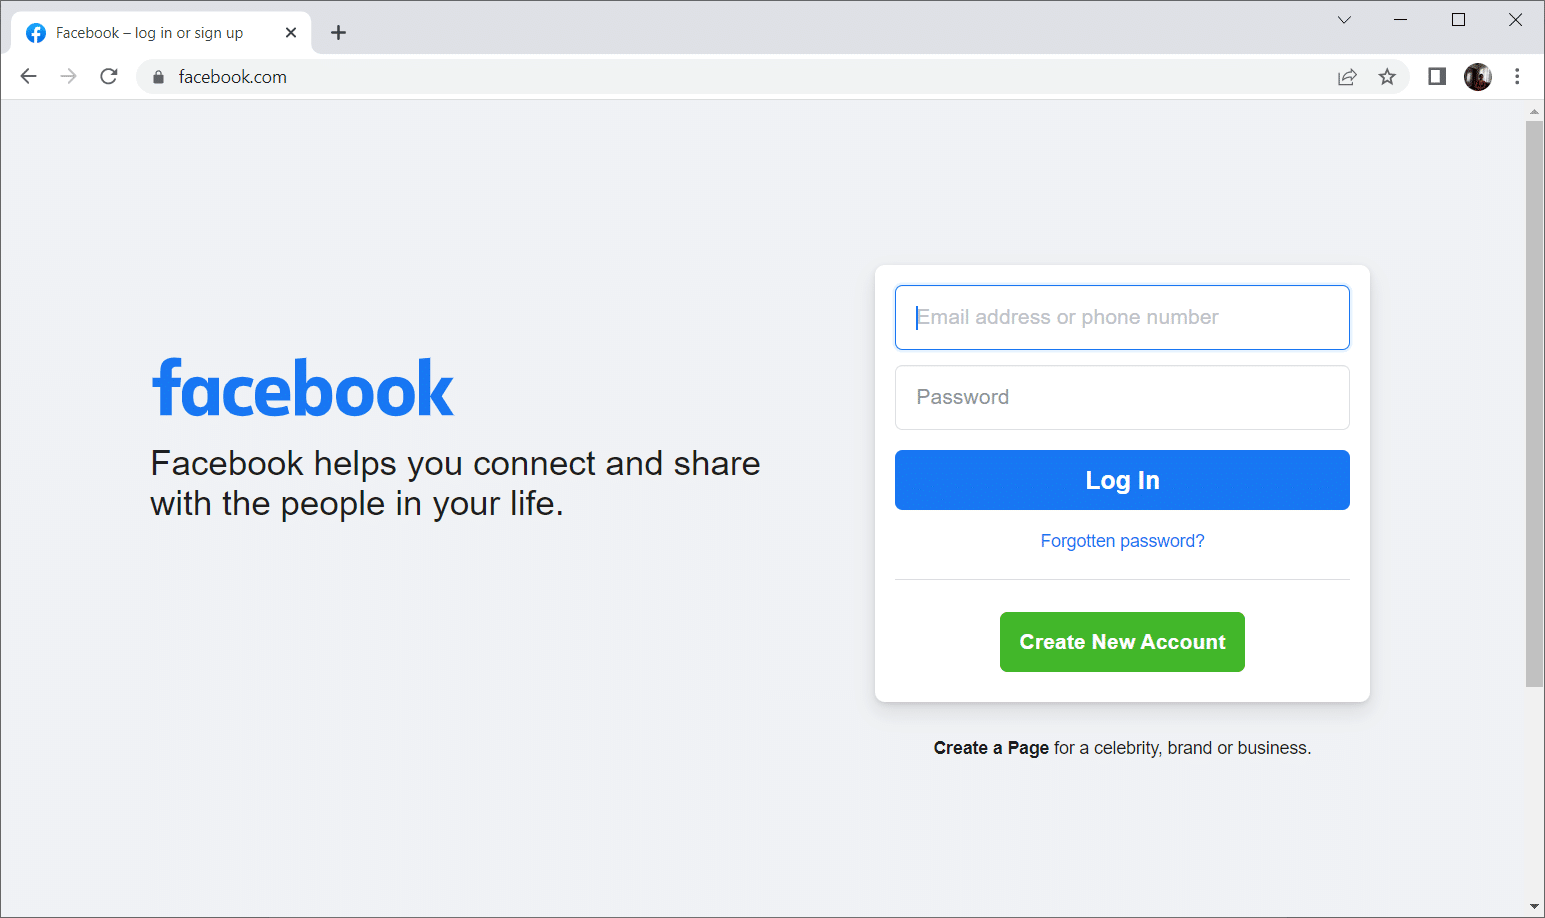 Login to your Facebook account with your credentials